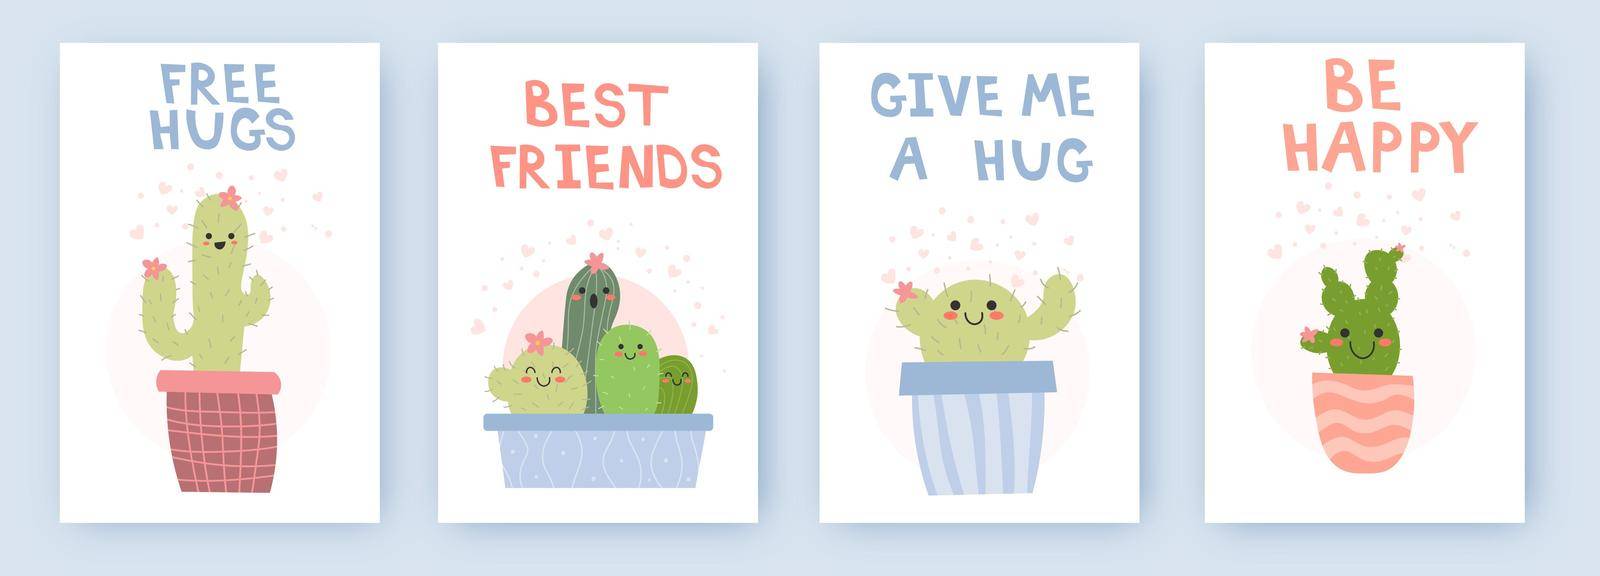 Cute cacti cards. Funny prickly plants cartoon characters, mexican symbol, blooming and hanging succulents and cactuses, pretty faces and hats, decorative pots, vector